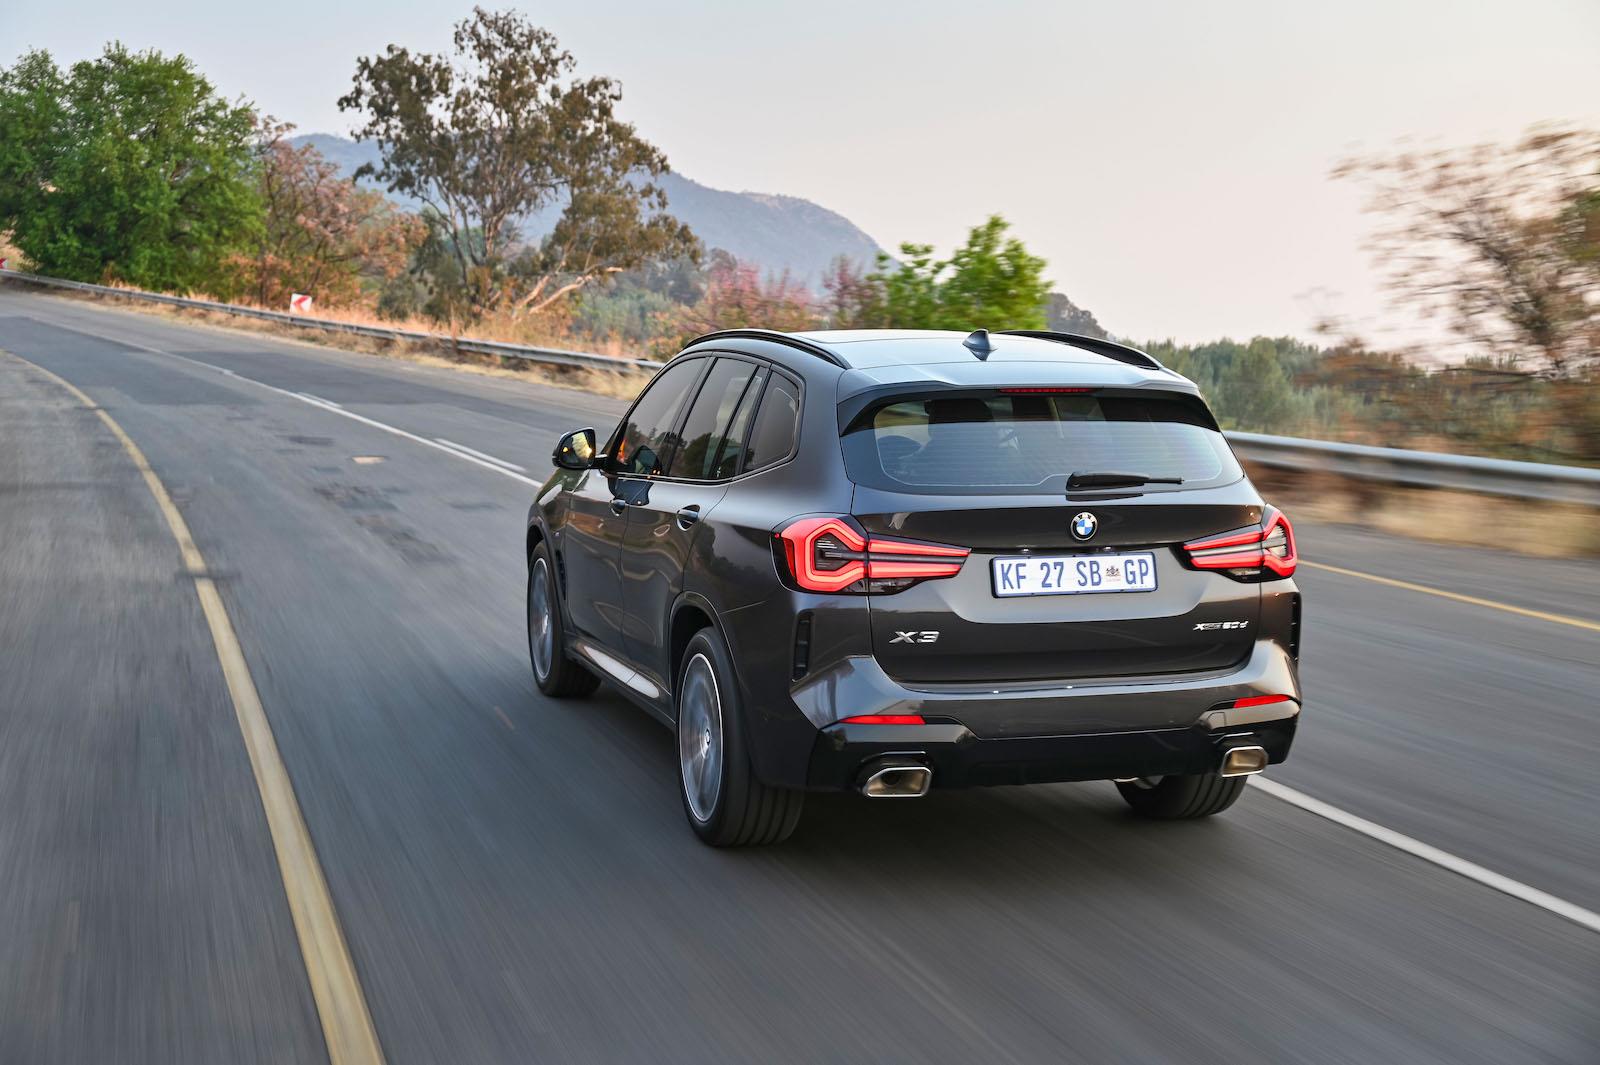 what is the bmw x3 top speed?